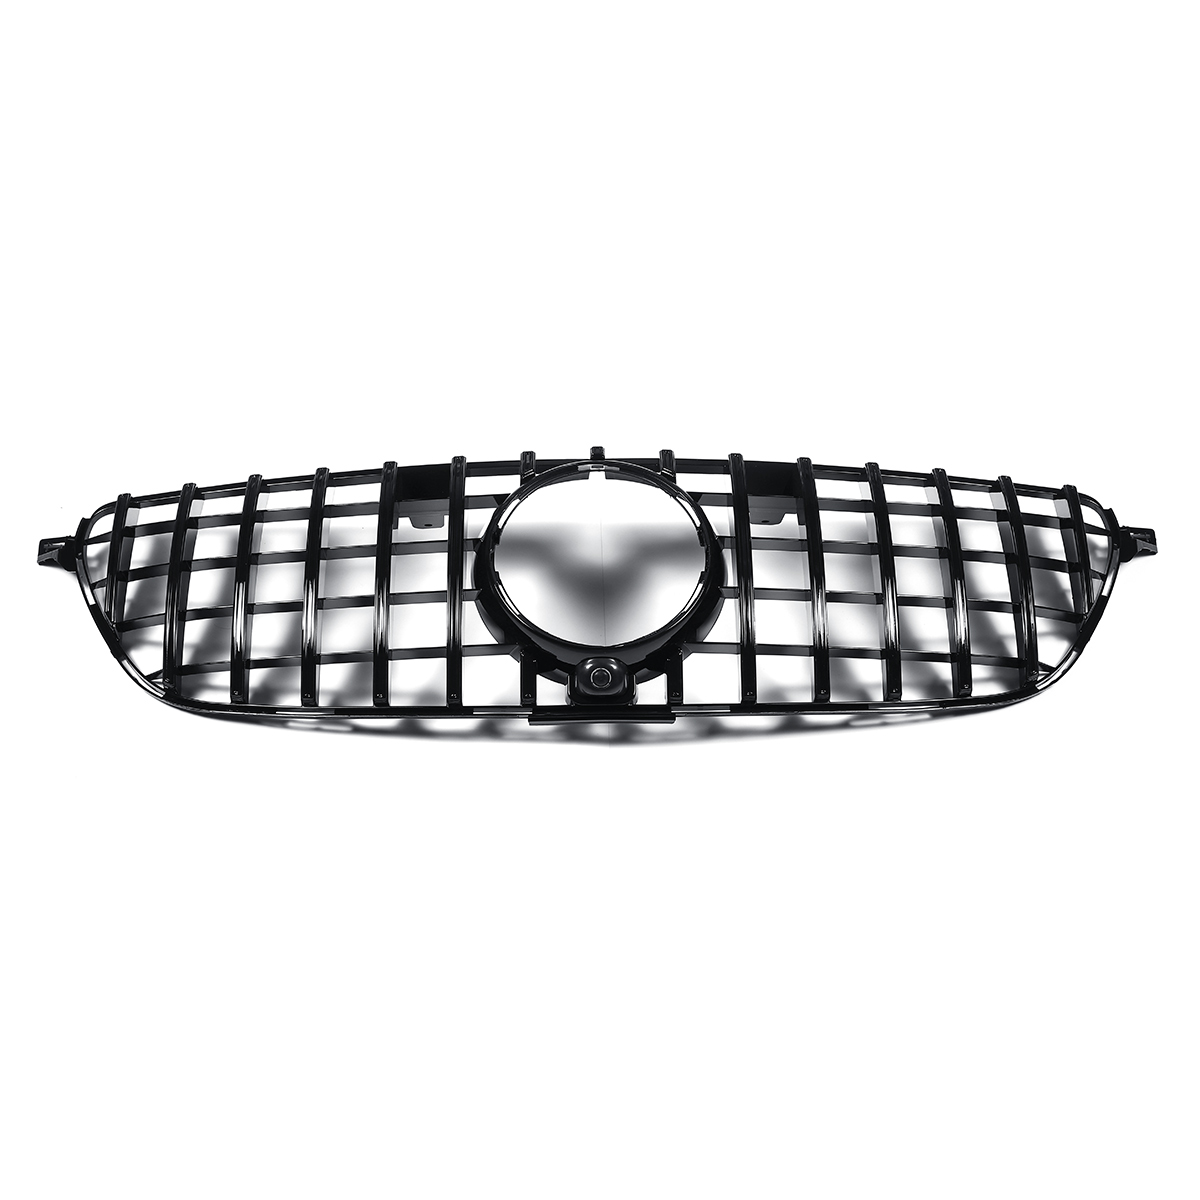 Front Grille Grill for Mercedes GLE W166 SUV GLE400 GLE500 GLE350 16-18 GT R - Auto GoShop